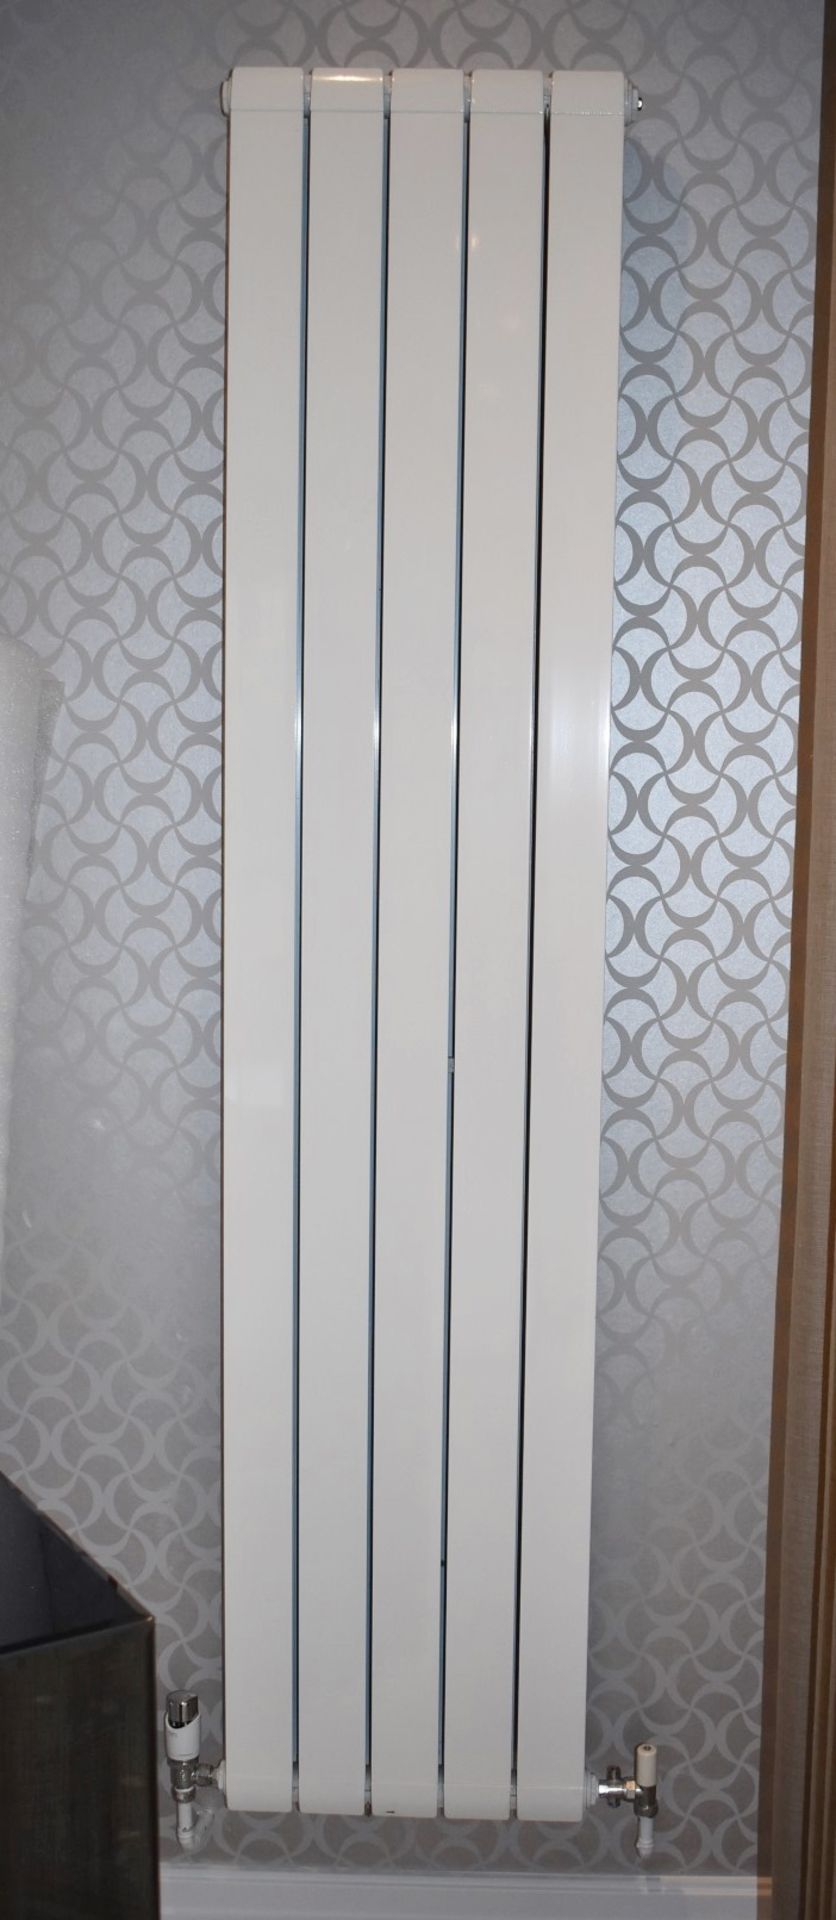 4 x Single Panel Vertical Wall Mounted Radiators - Ref: RR10 / LNG - CL781 - Location: Hale Barns - Image 2 of 8